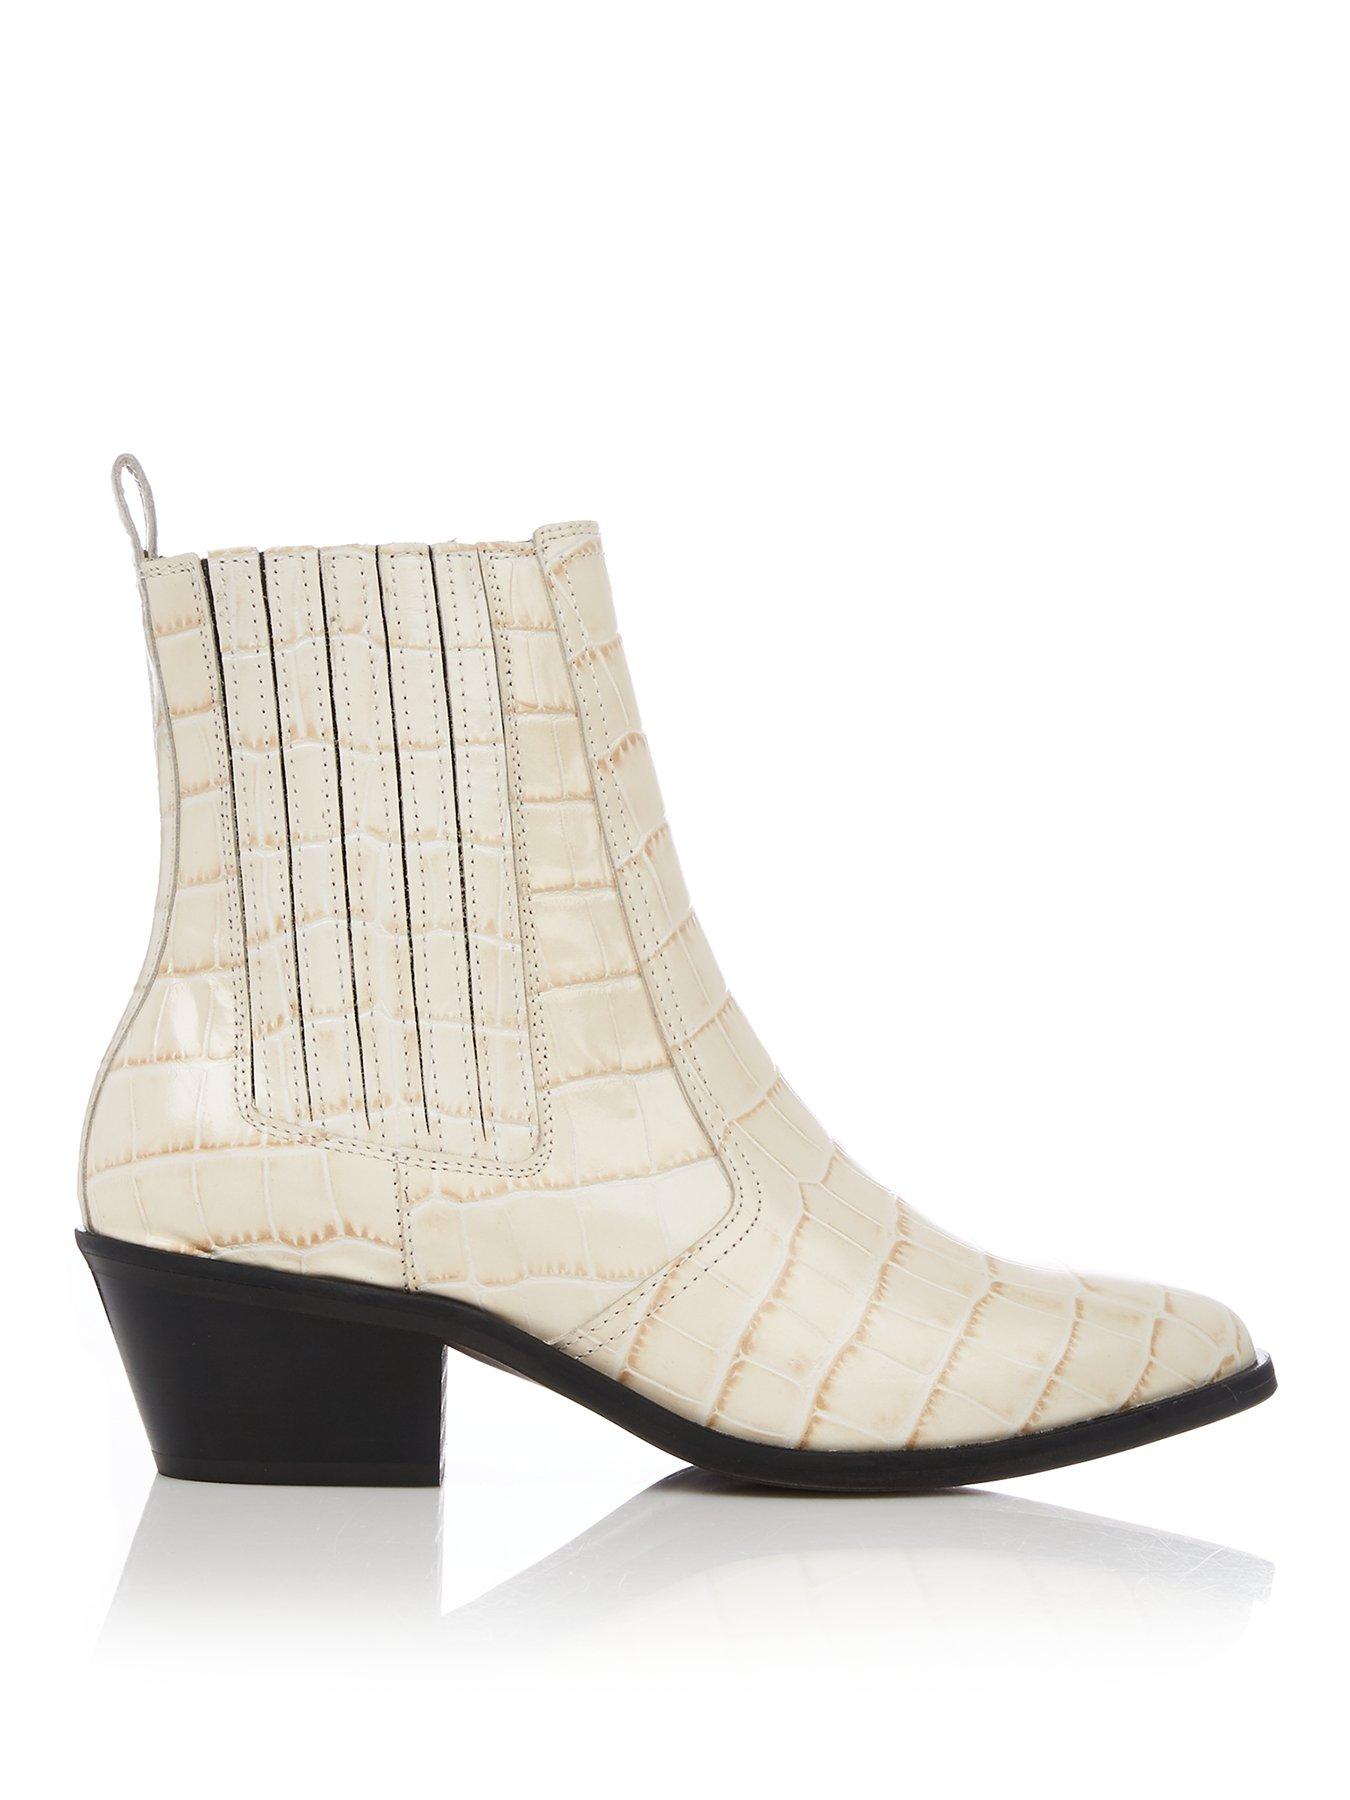 cream leather ankle boots uk